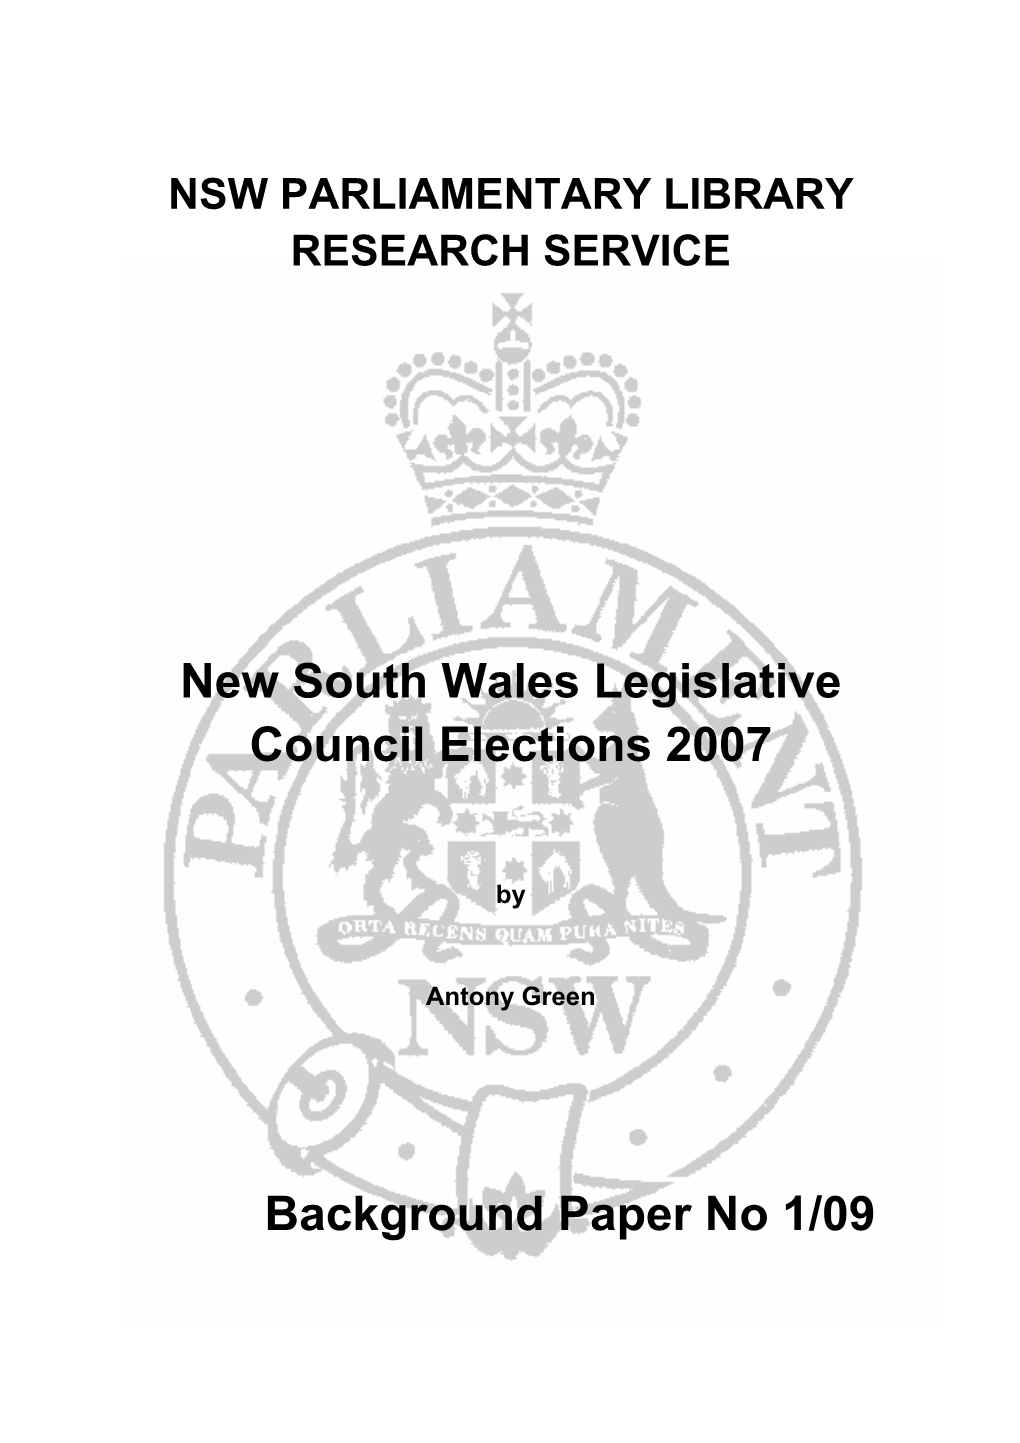 New South Wales Legislative Council Elections 2007 Background Paper